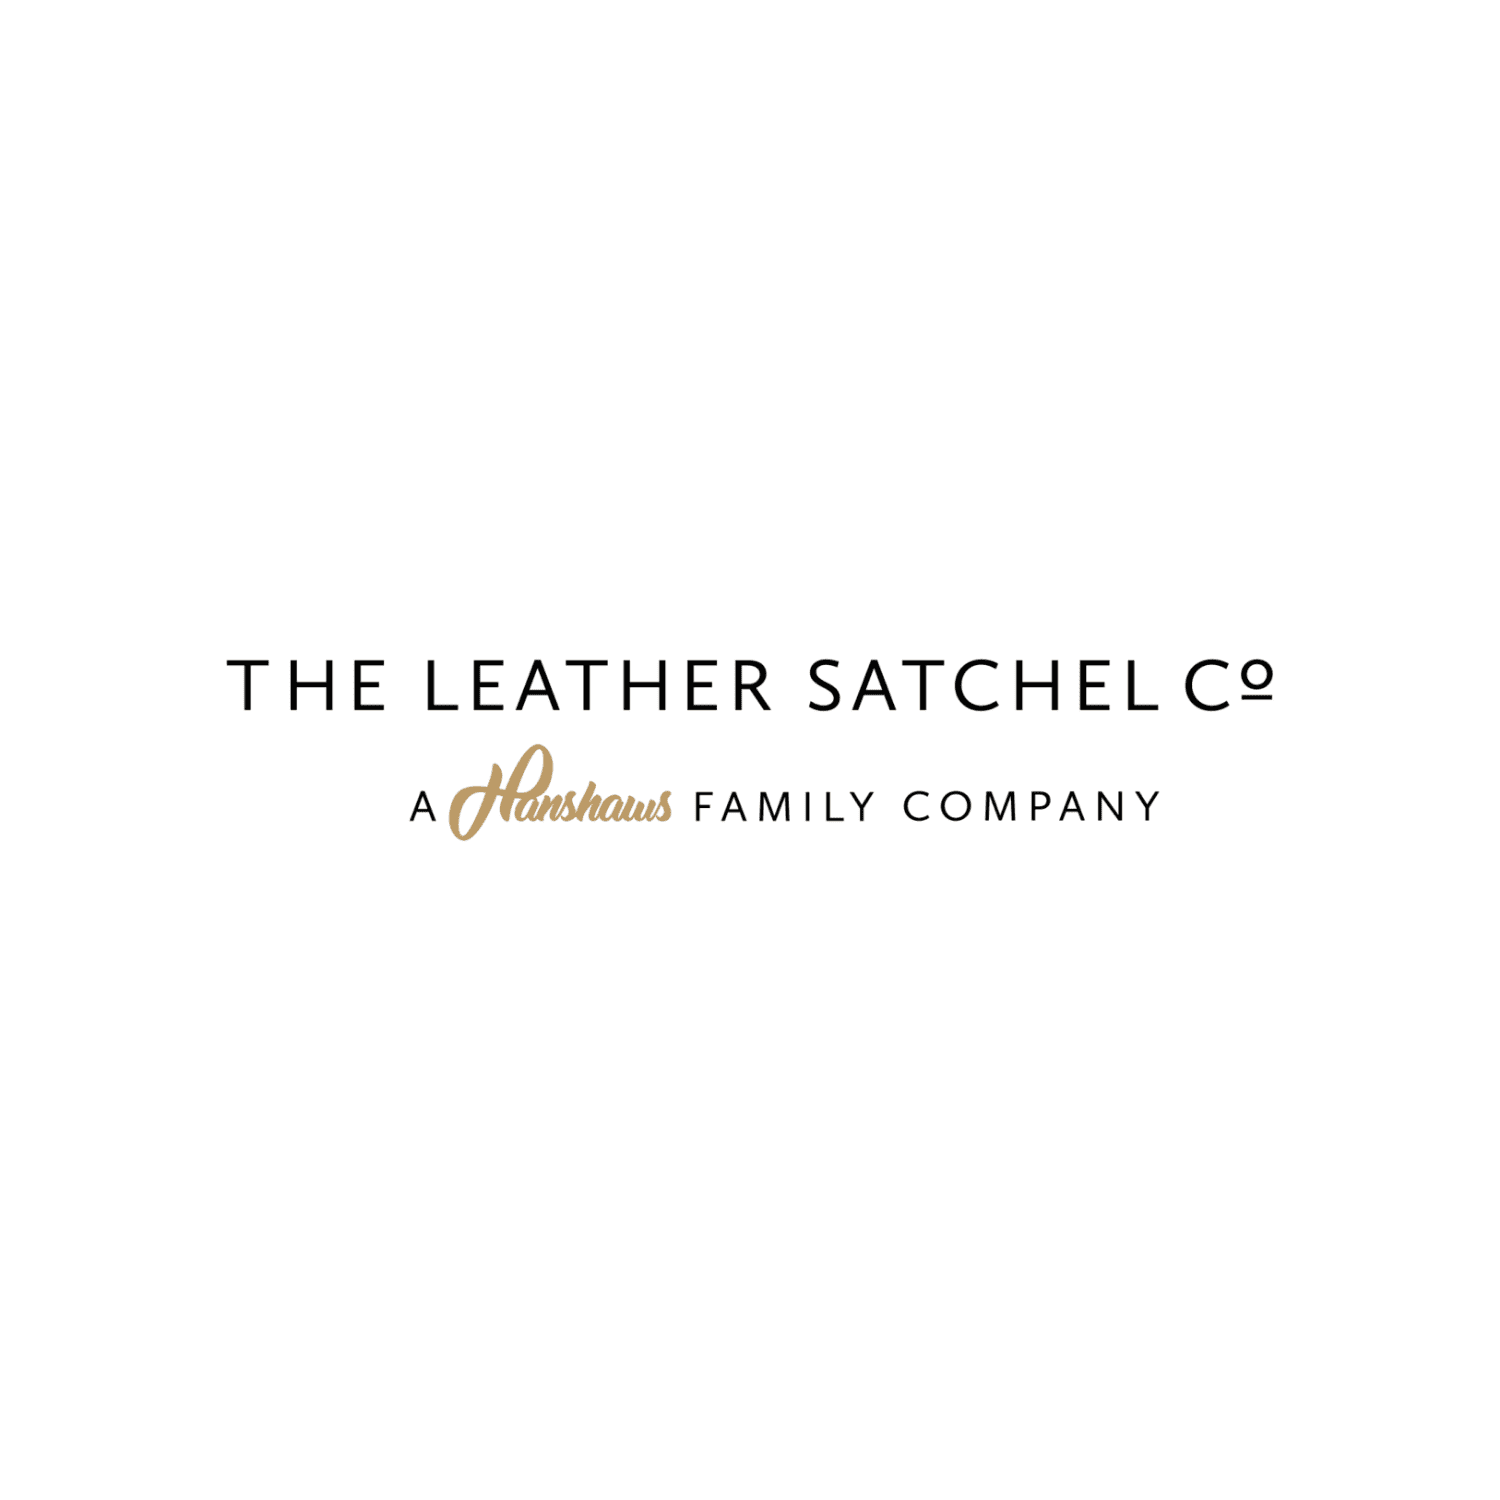 The Leather Satchel Company